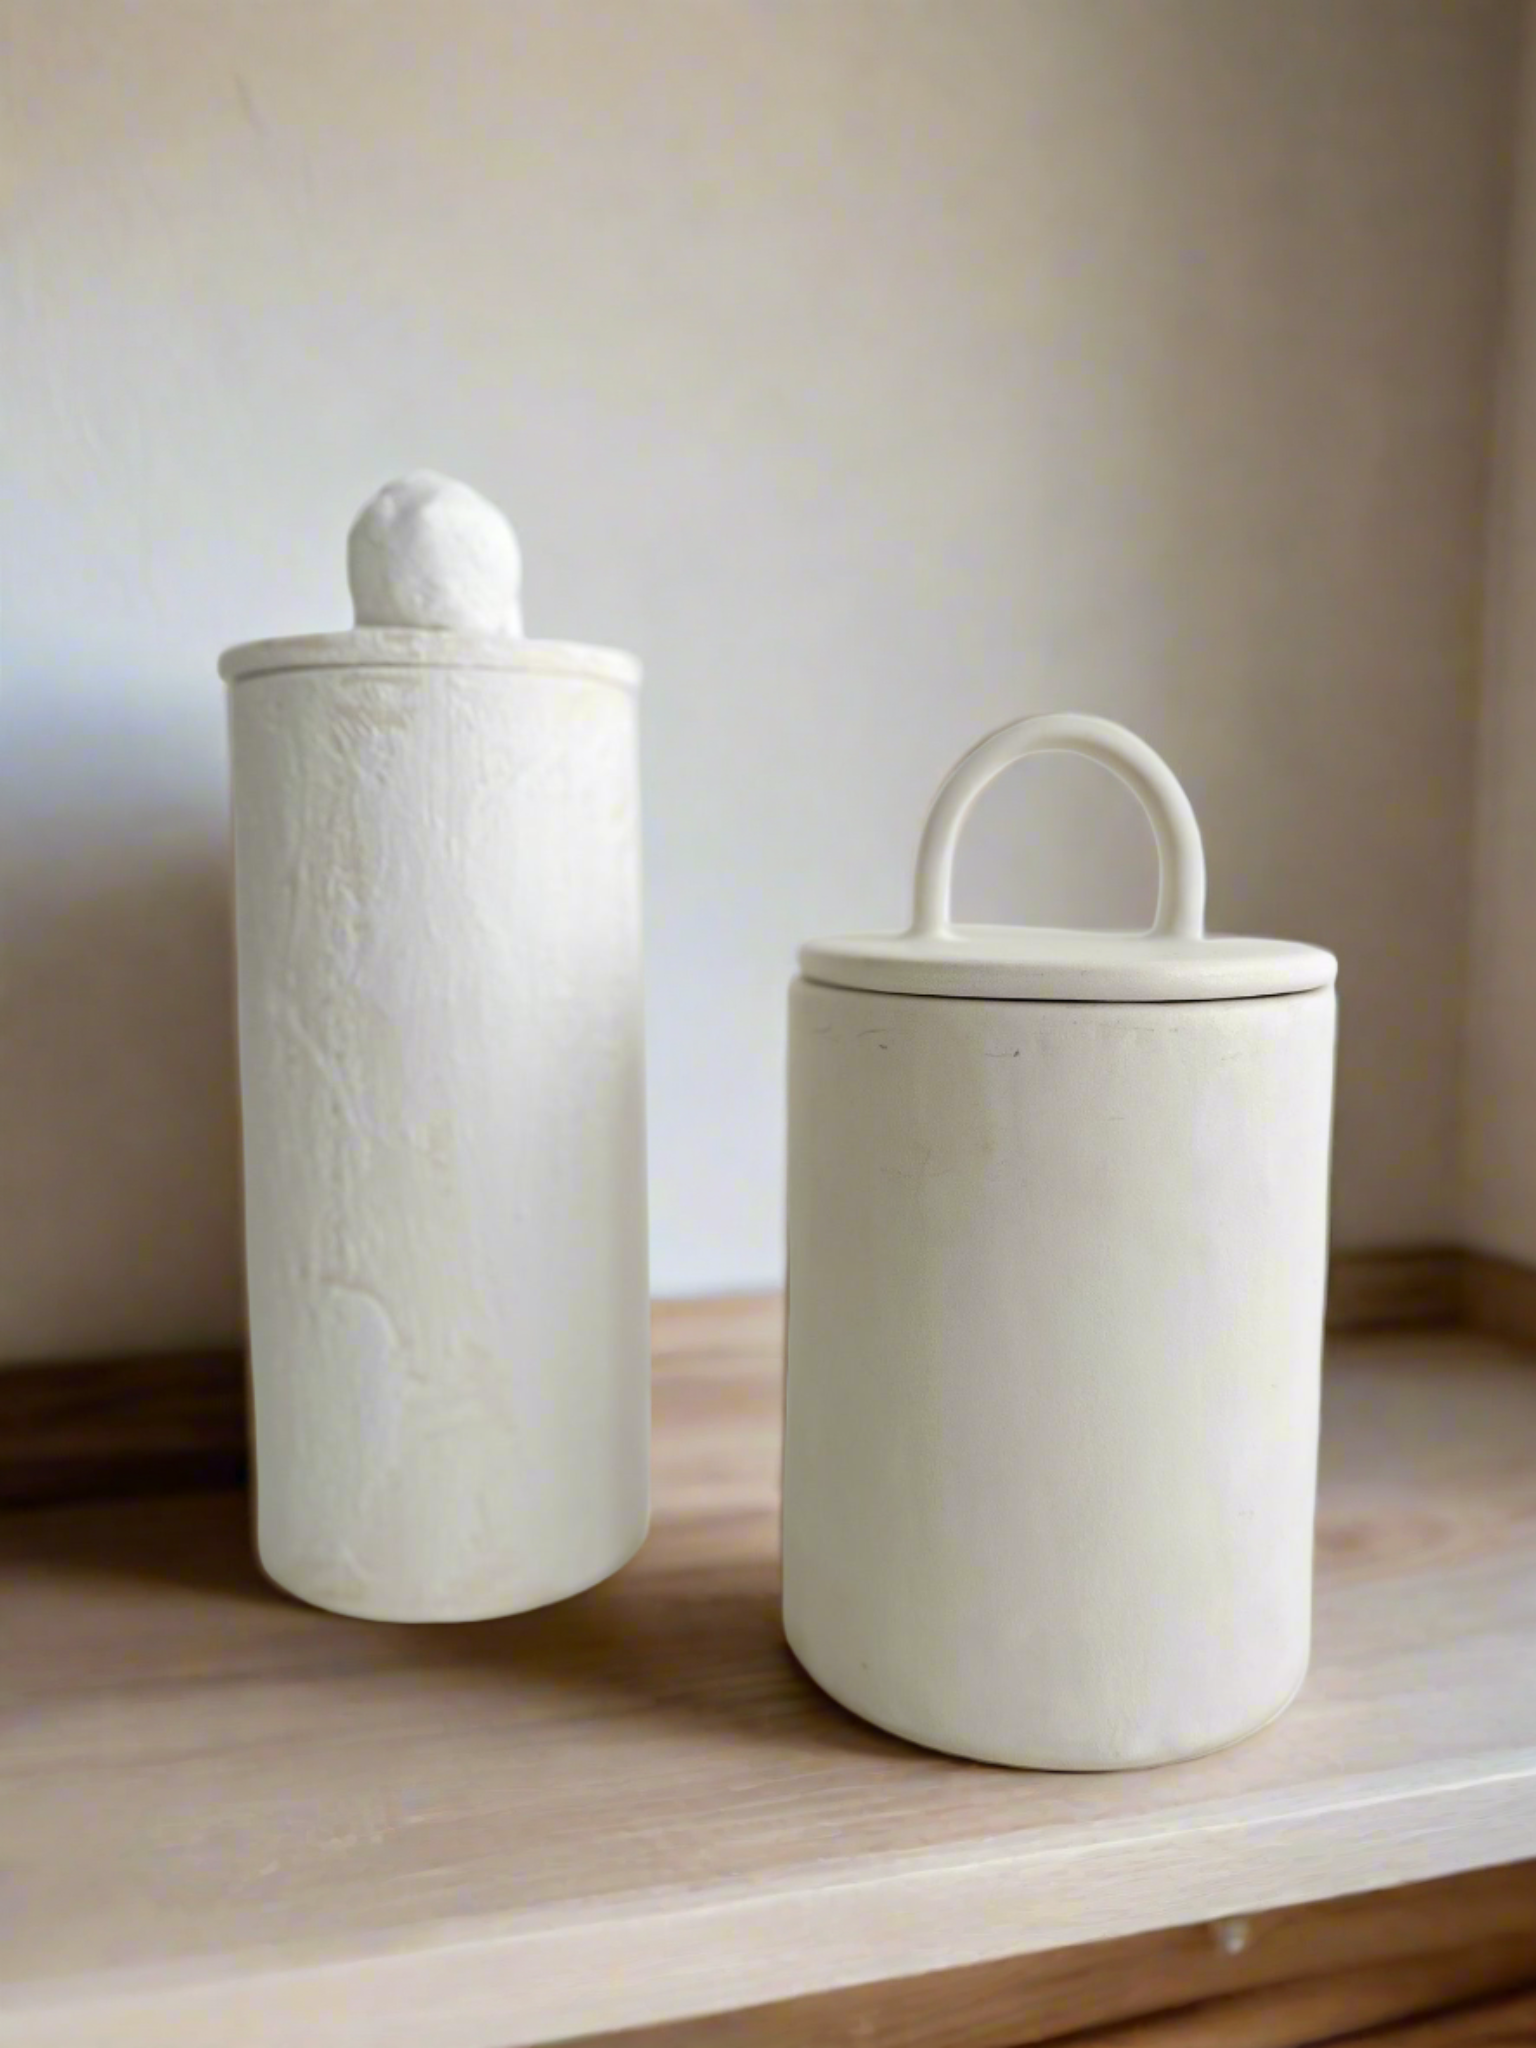 Personalized ceramic kitchen canisters with handle options